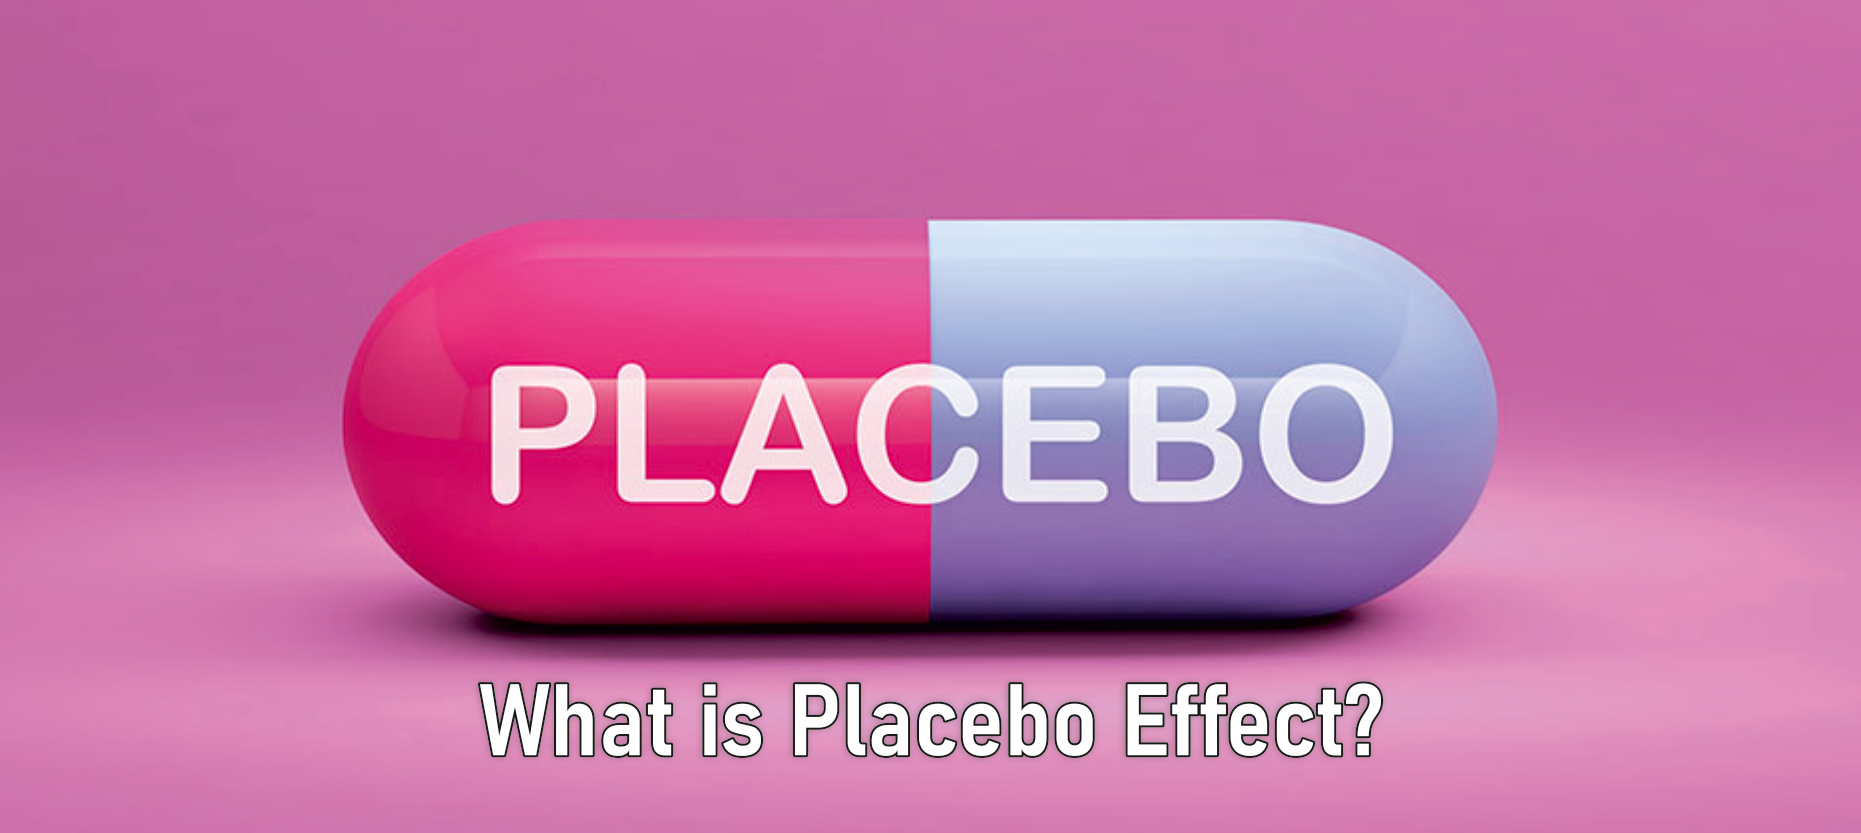 What is a Placebo Effect?